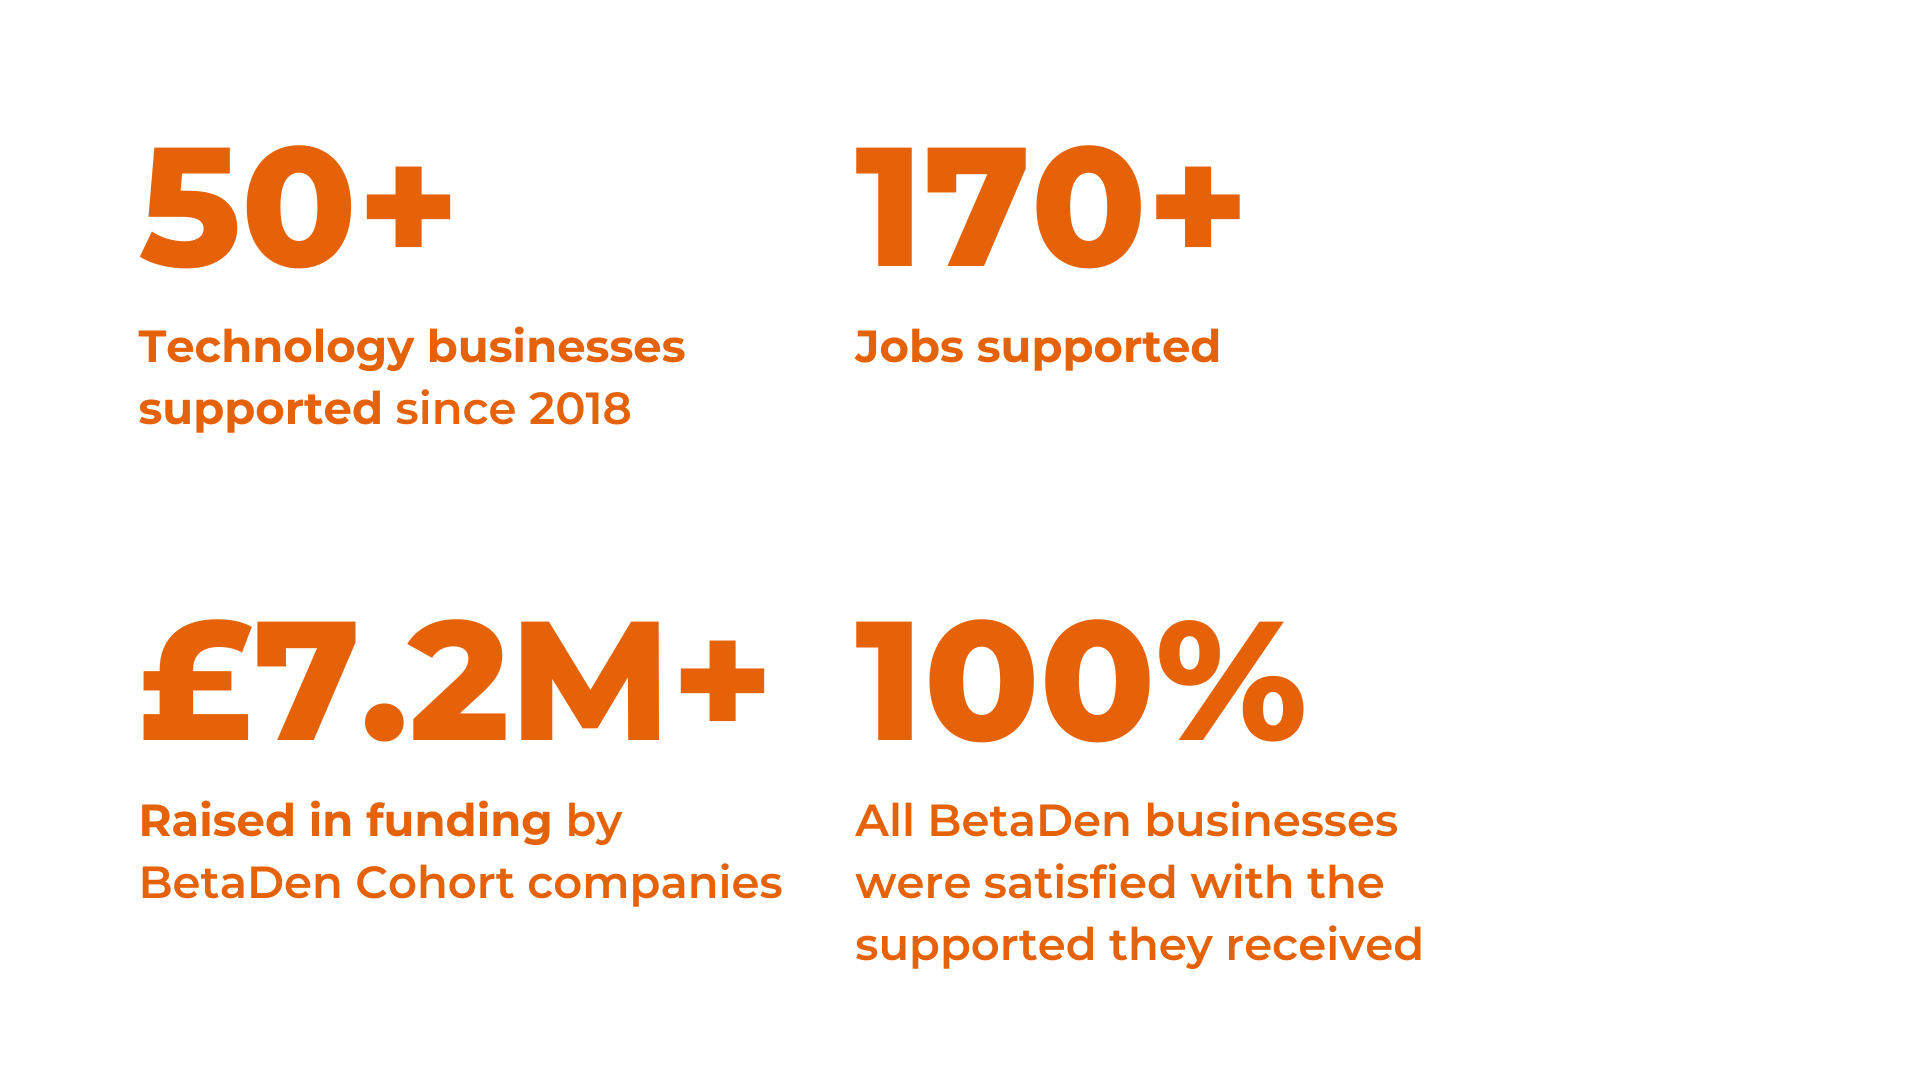 50+ technology businesses supported since 2018, 100+ jobs supported, £6.1+M raised in funding by BetaDen cohort companies, 100% All BetaDen Businesses were satisfied with the support they received